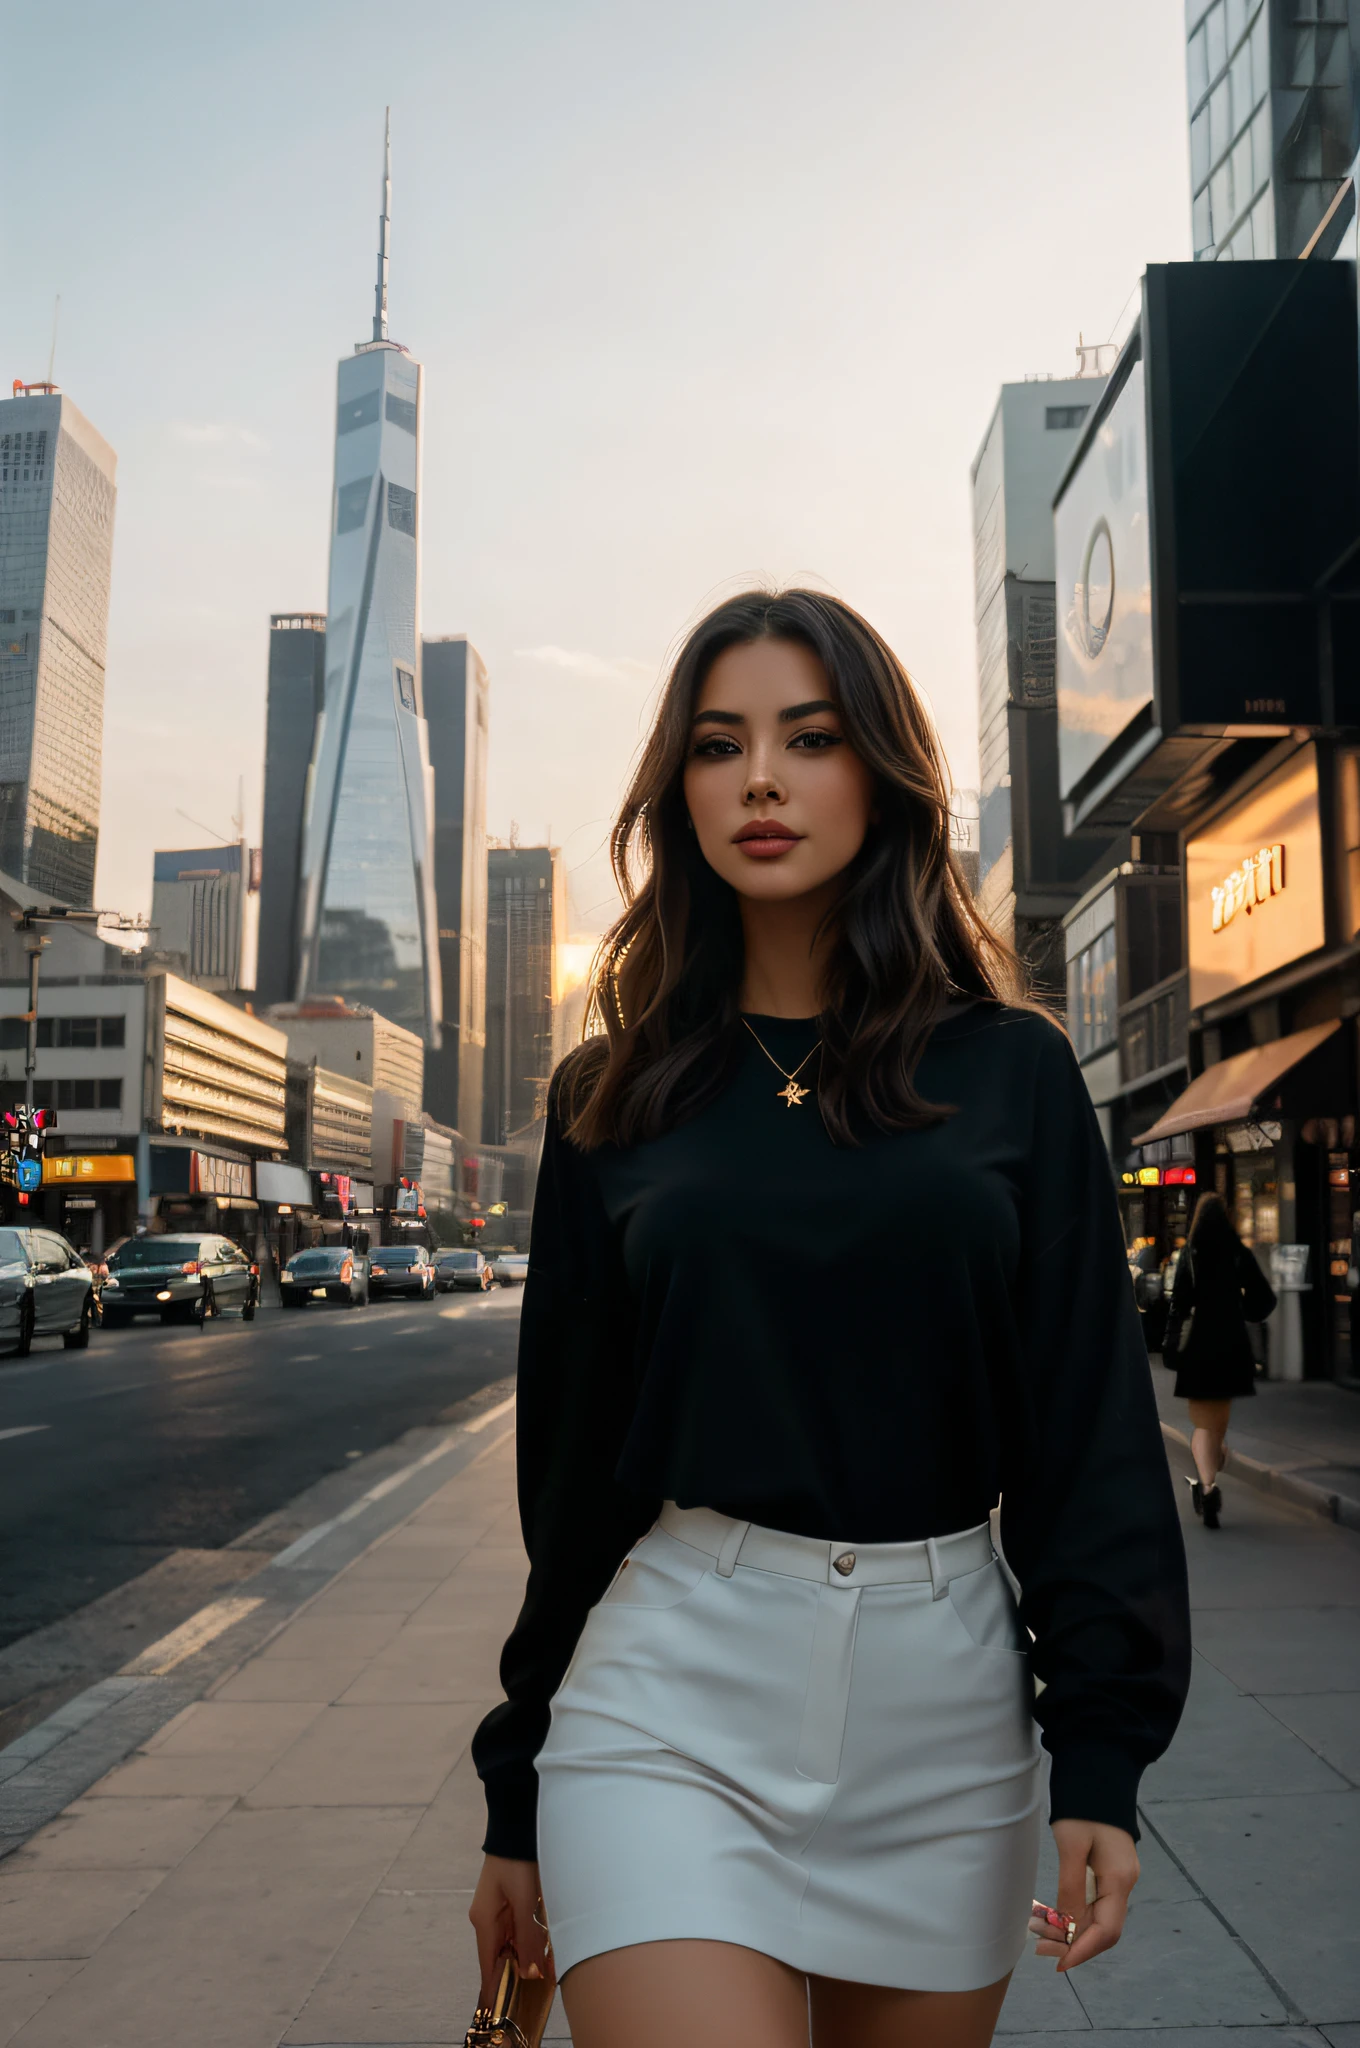 A girl walking in the city, accompanied by the bustling sounds of cars and footsteps. Beautiful detailed eyes and lips that add charm to her face. She is dressed in fashionable clothes, radiating confidence and elegance. The cityscape is filled with tall skyscrapers, vibrant neon lights, and busy streets. The air is filled with a mix of excitement and urban energy. The girl walks with a purpose, her long eyelashes fluttering in the wind. The city is bathed in a warm sunset glow, casting a magical golden light on everything around. The artwork is created in a realistic style with ultra-detailed and vivid colors. The composition captures the dynamic atmosphere of the city, with sharp focus on the girl as the central figure. The lighting emphasizes the contrast between light and shadow, adding depth to the scene. The overall image quality is of the best quality, with high resolution and exquisite attention to detail.